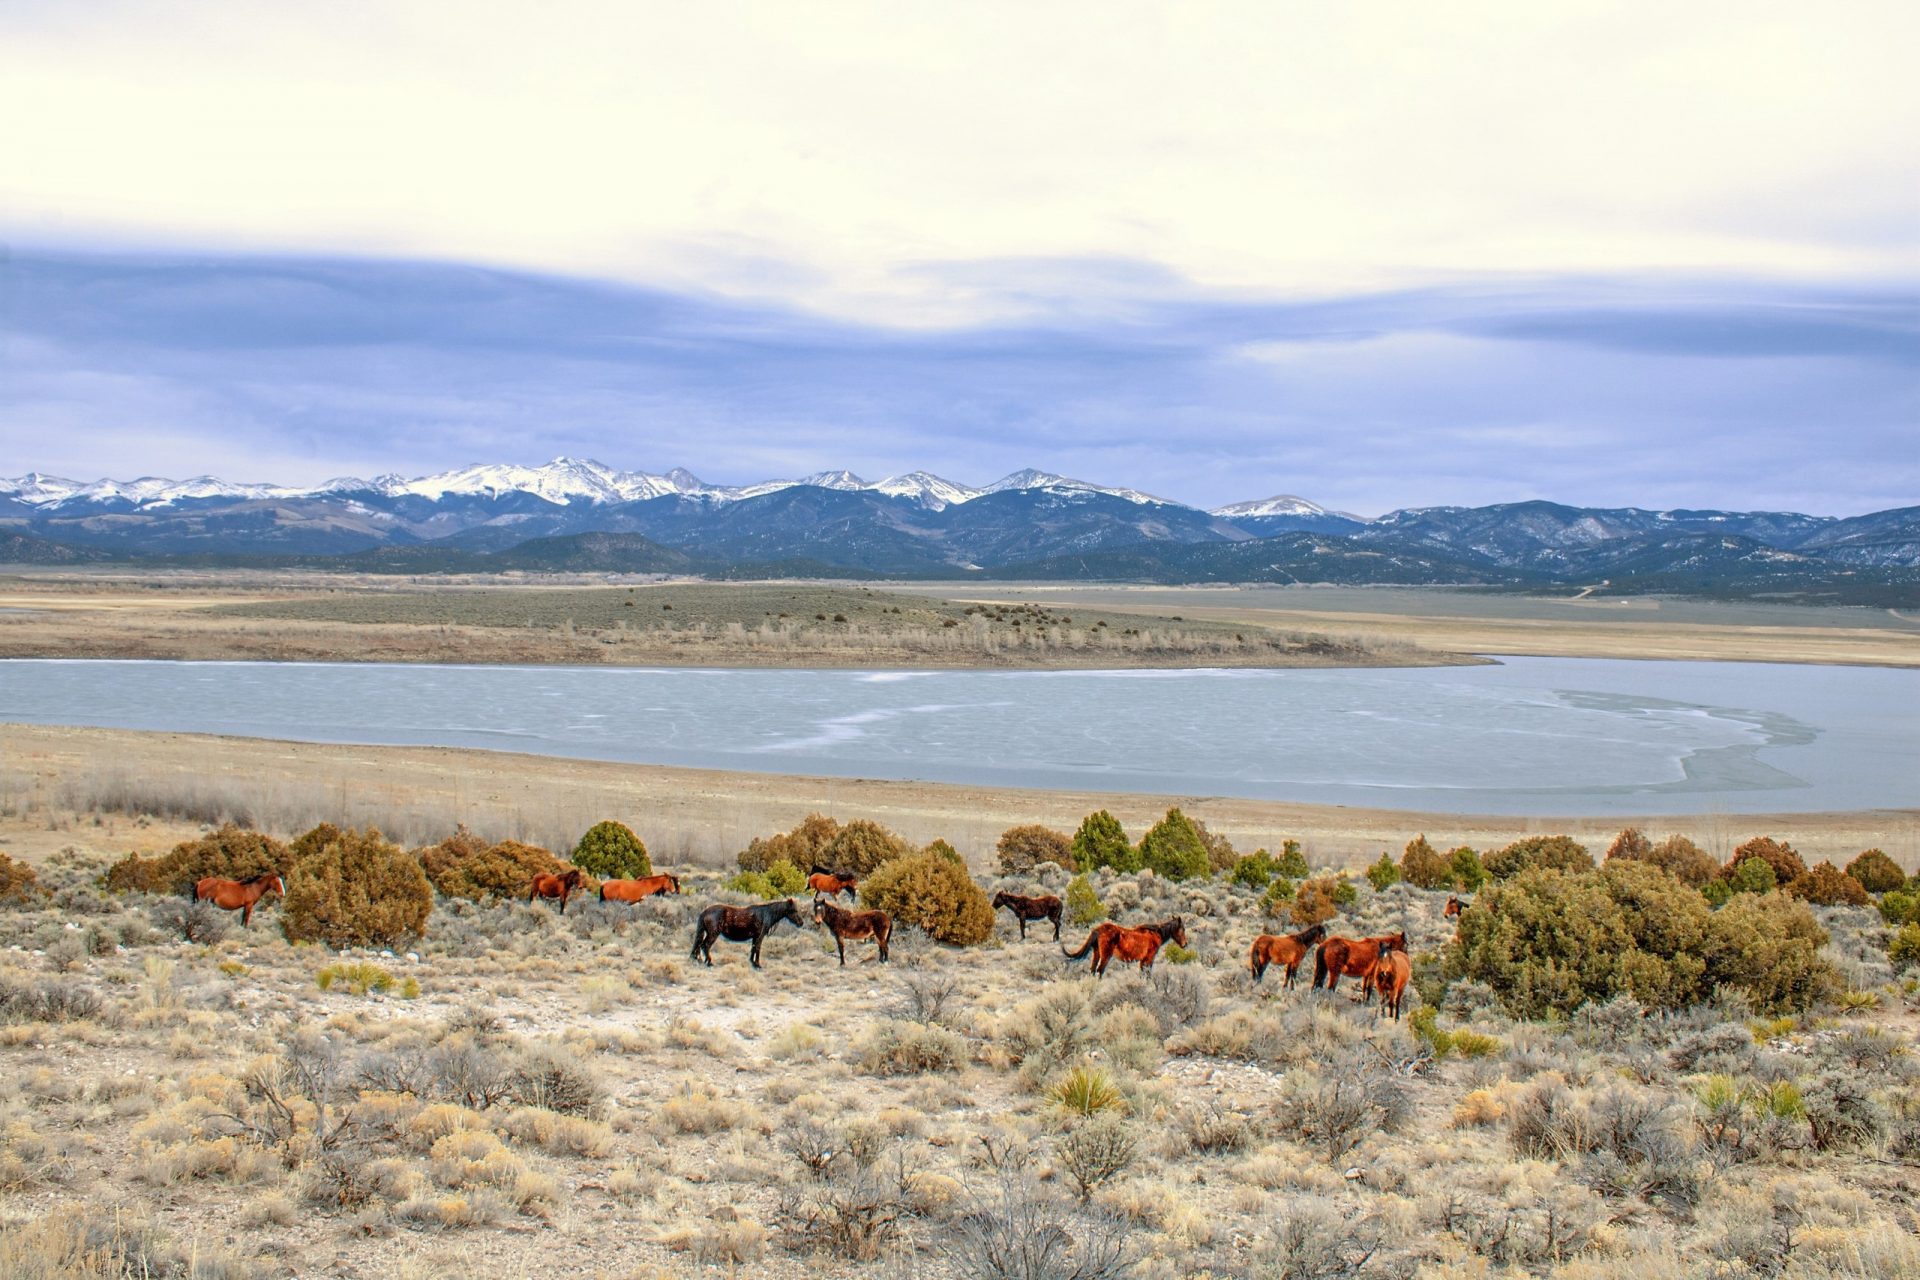 Land for Sale in Colorado 2.03 Acres Lakefront, Mountainview, Wild Horses in Southern CO